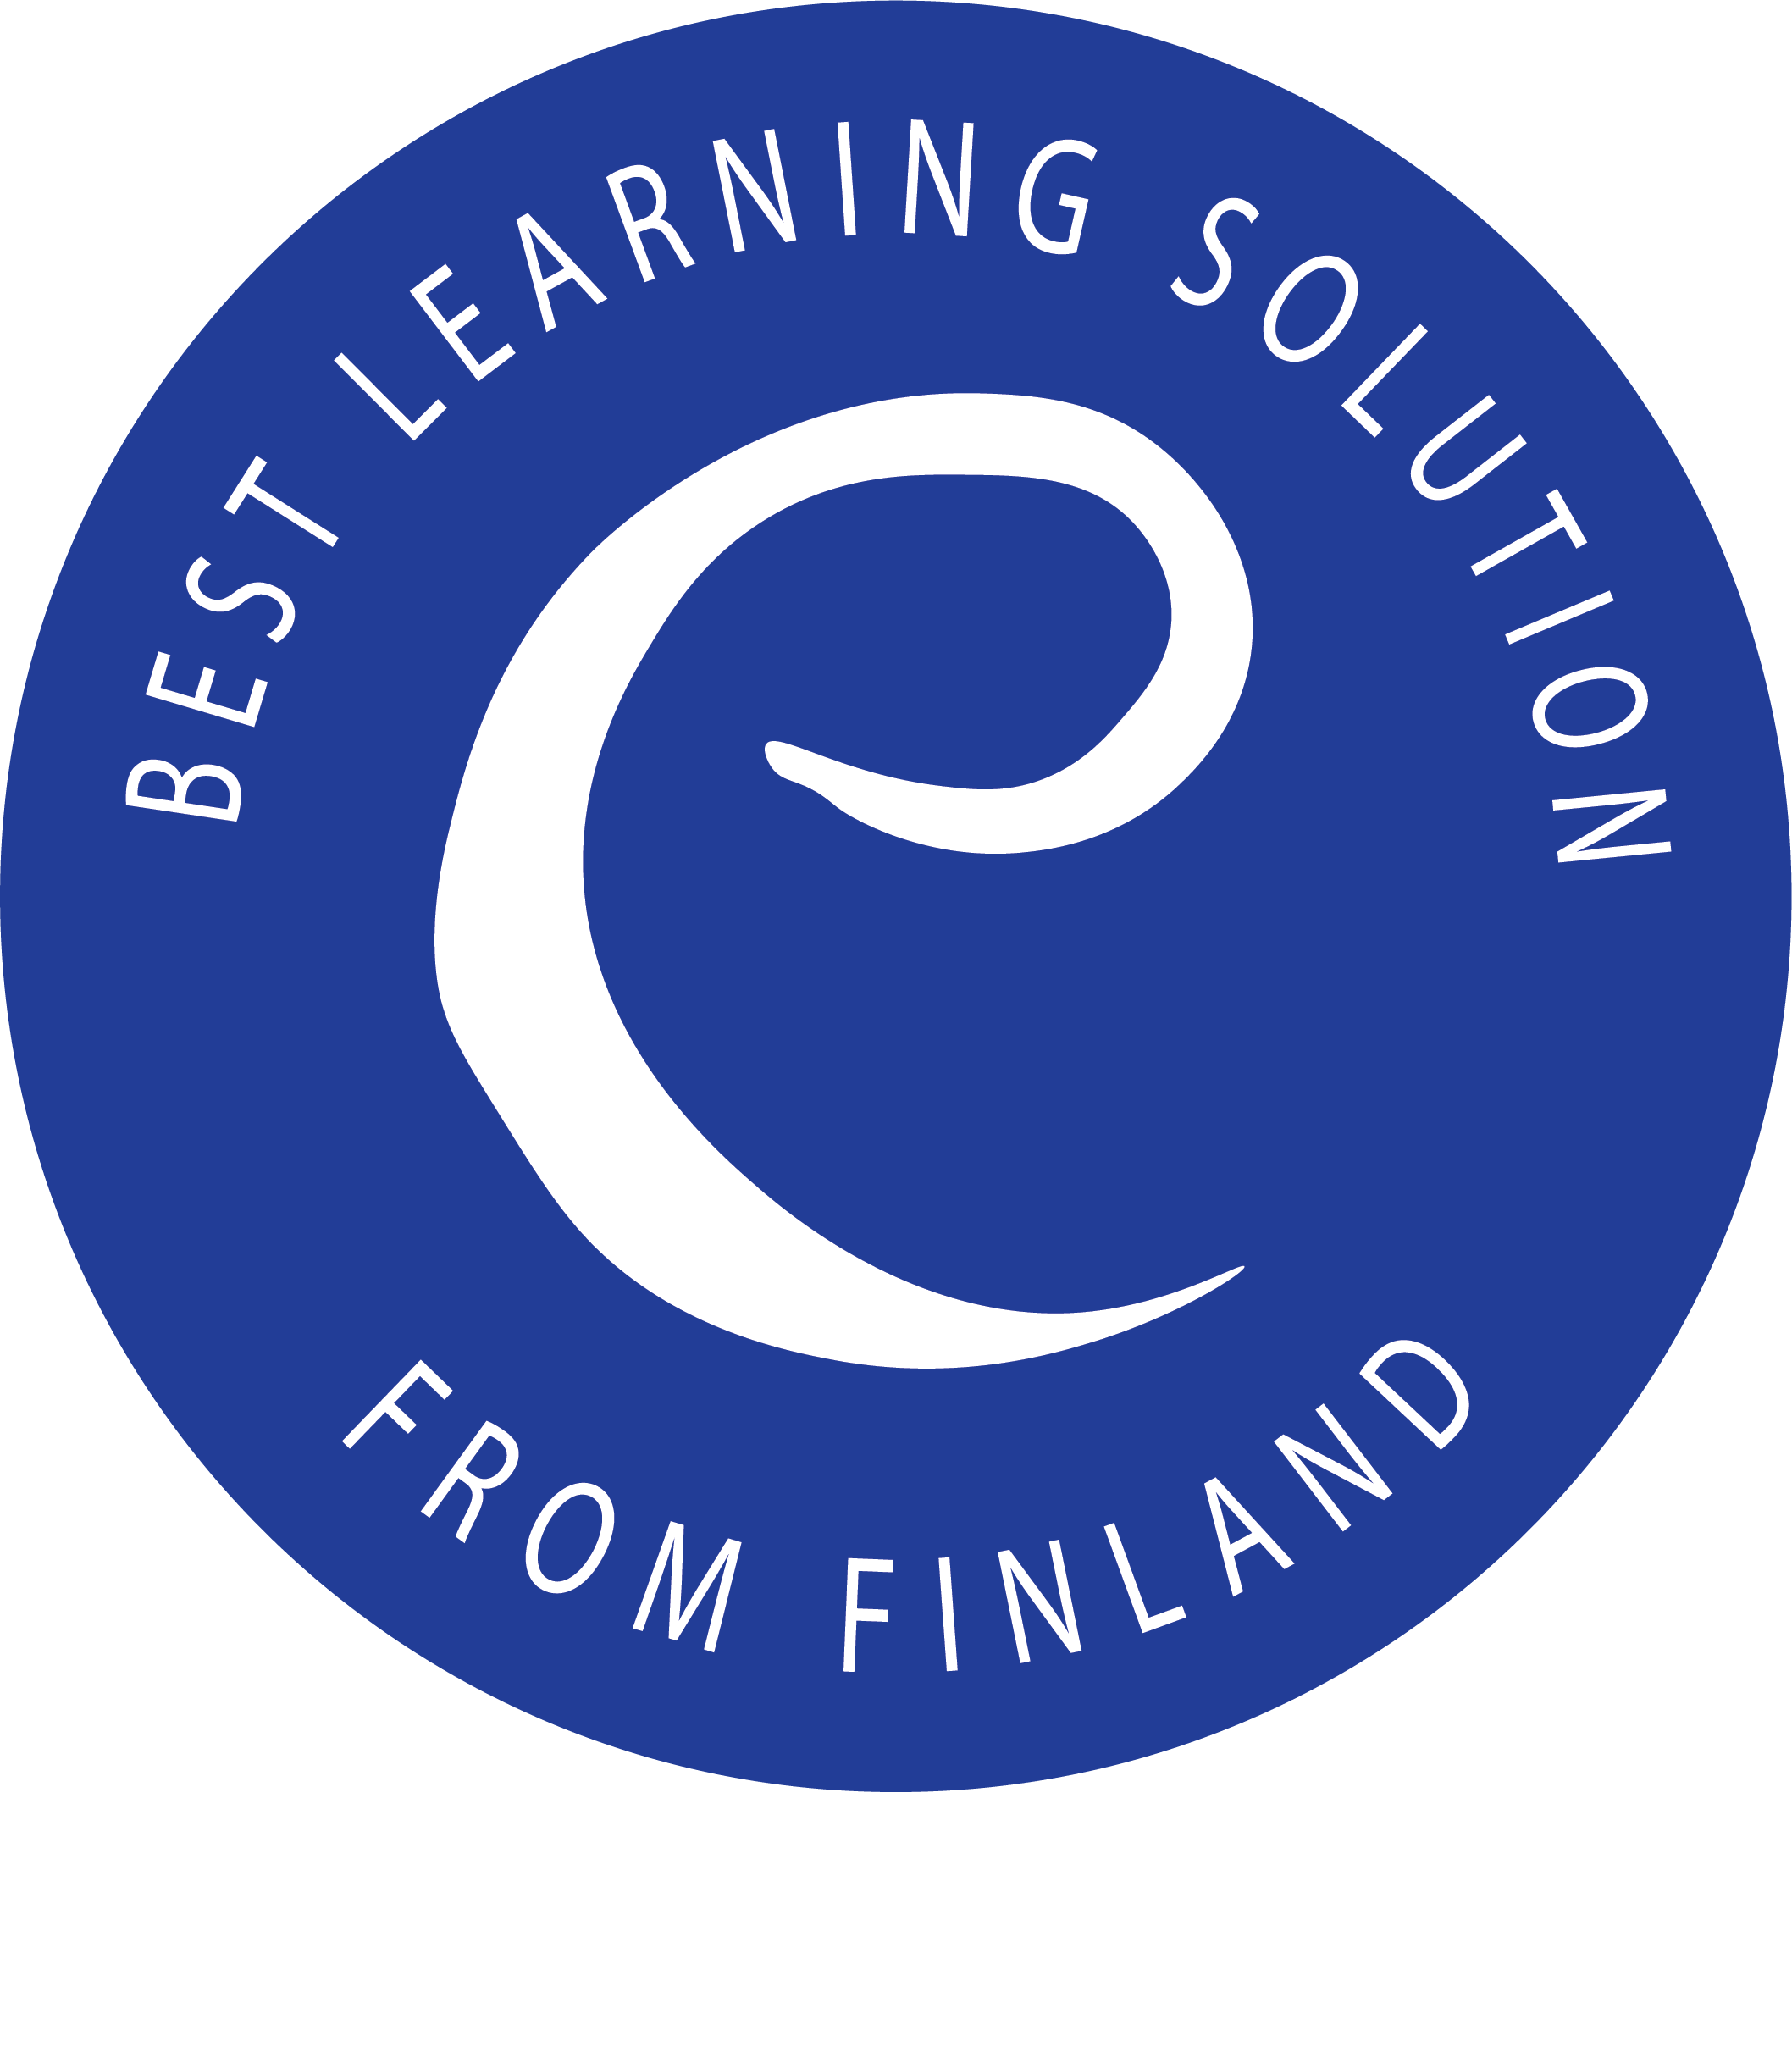 Best Education From Finland